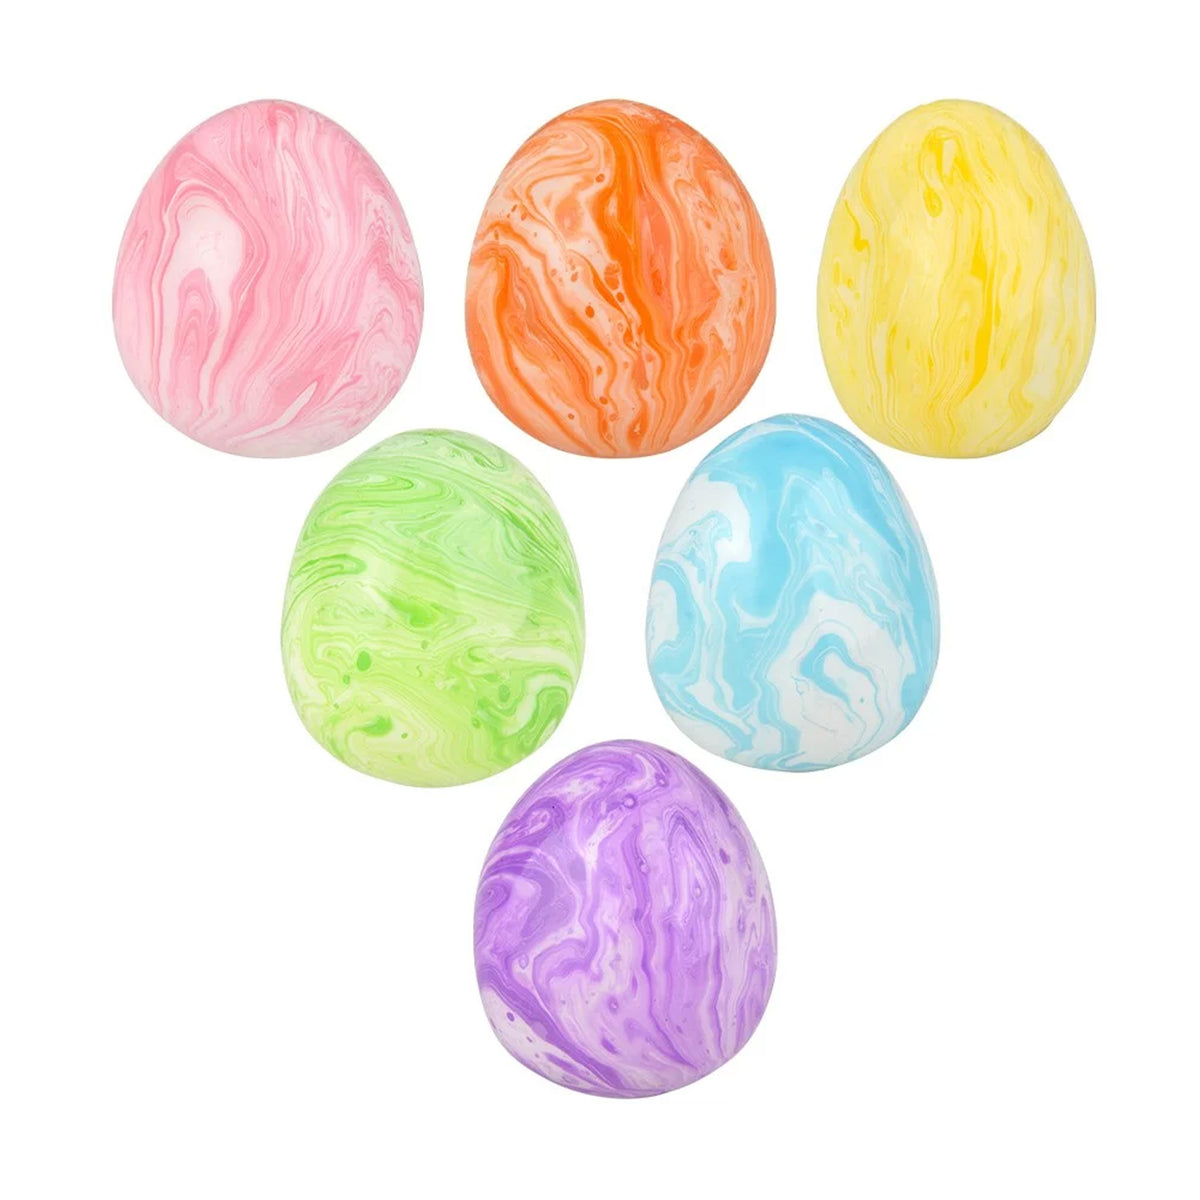 Squish Easter Egg -(Sold By 1 Dozen =$26.99)